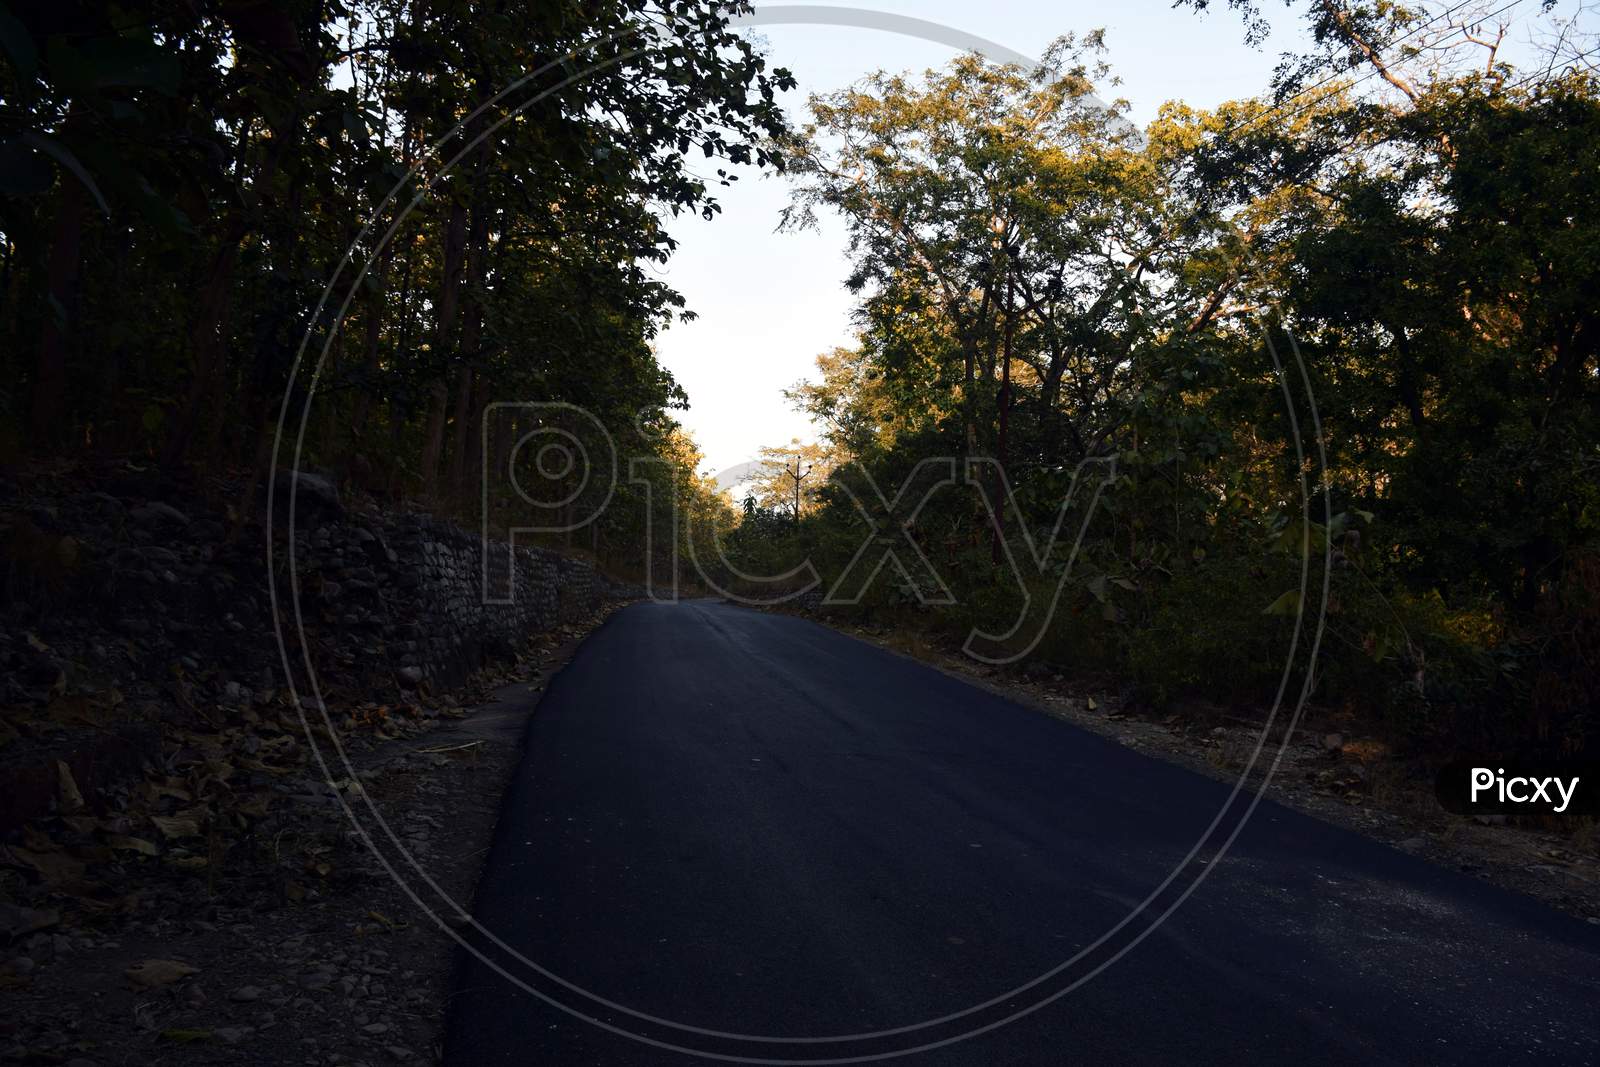 Centered Road Leading Symmetrical Through A Valley In The Thai Jungle In The Region Of Nainital, Uttarakhand, India